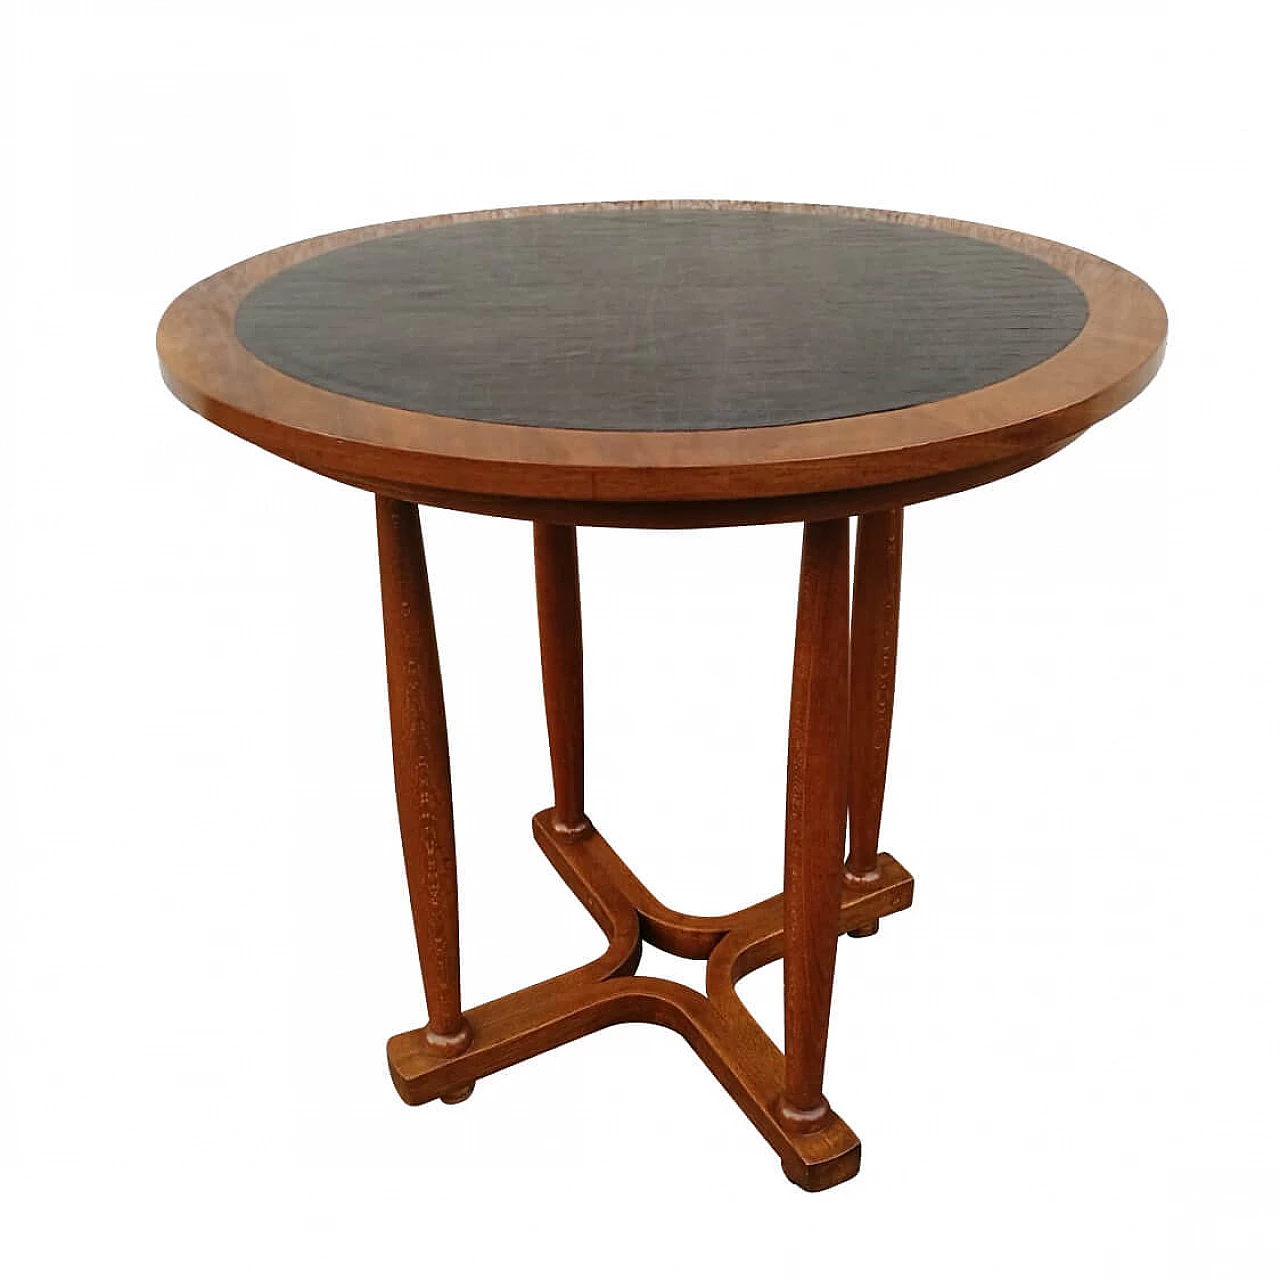 Coffee table in beech wood and top in Thonet leather, end of 19th century 1162923